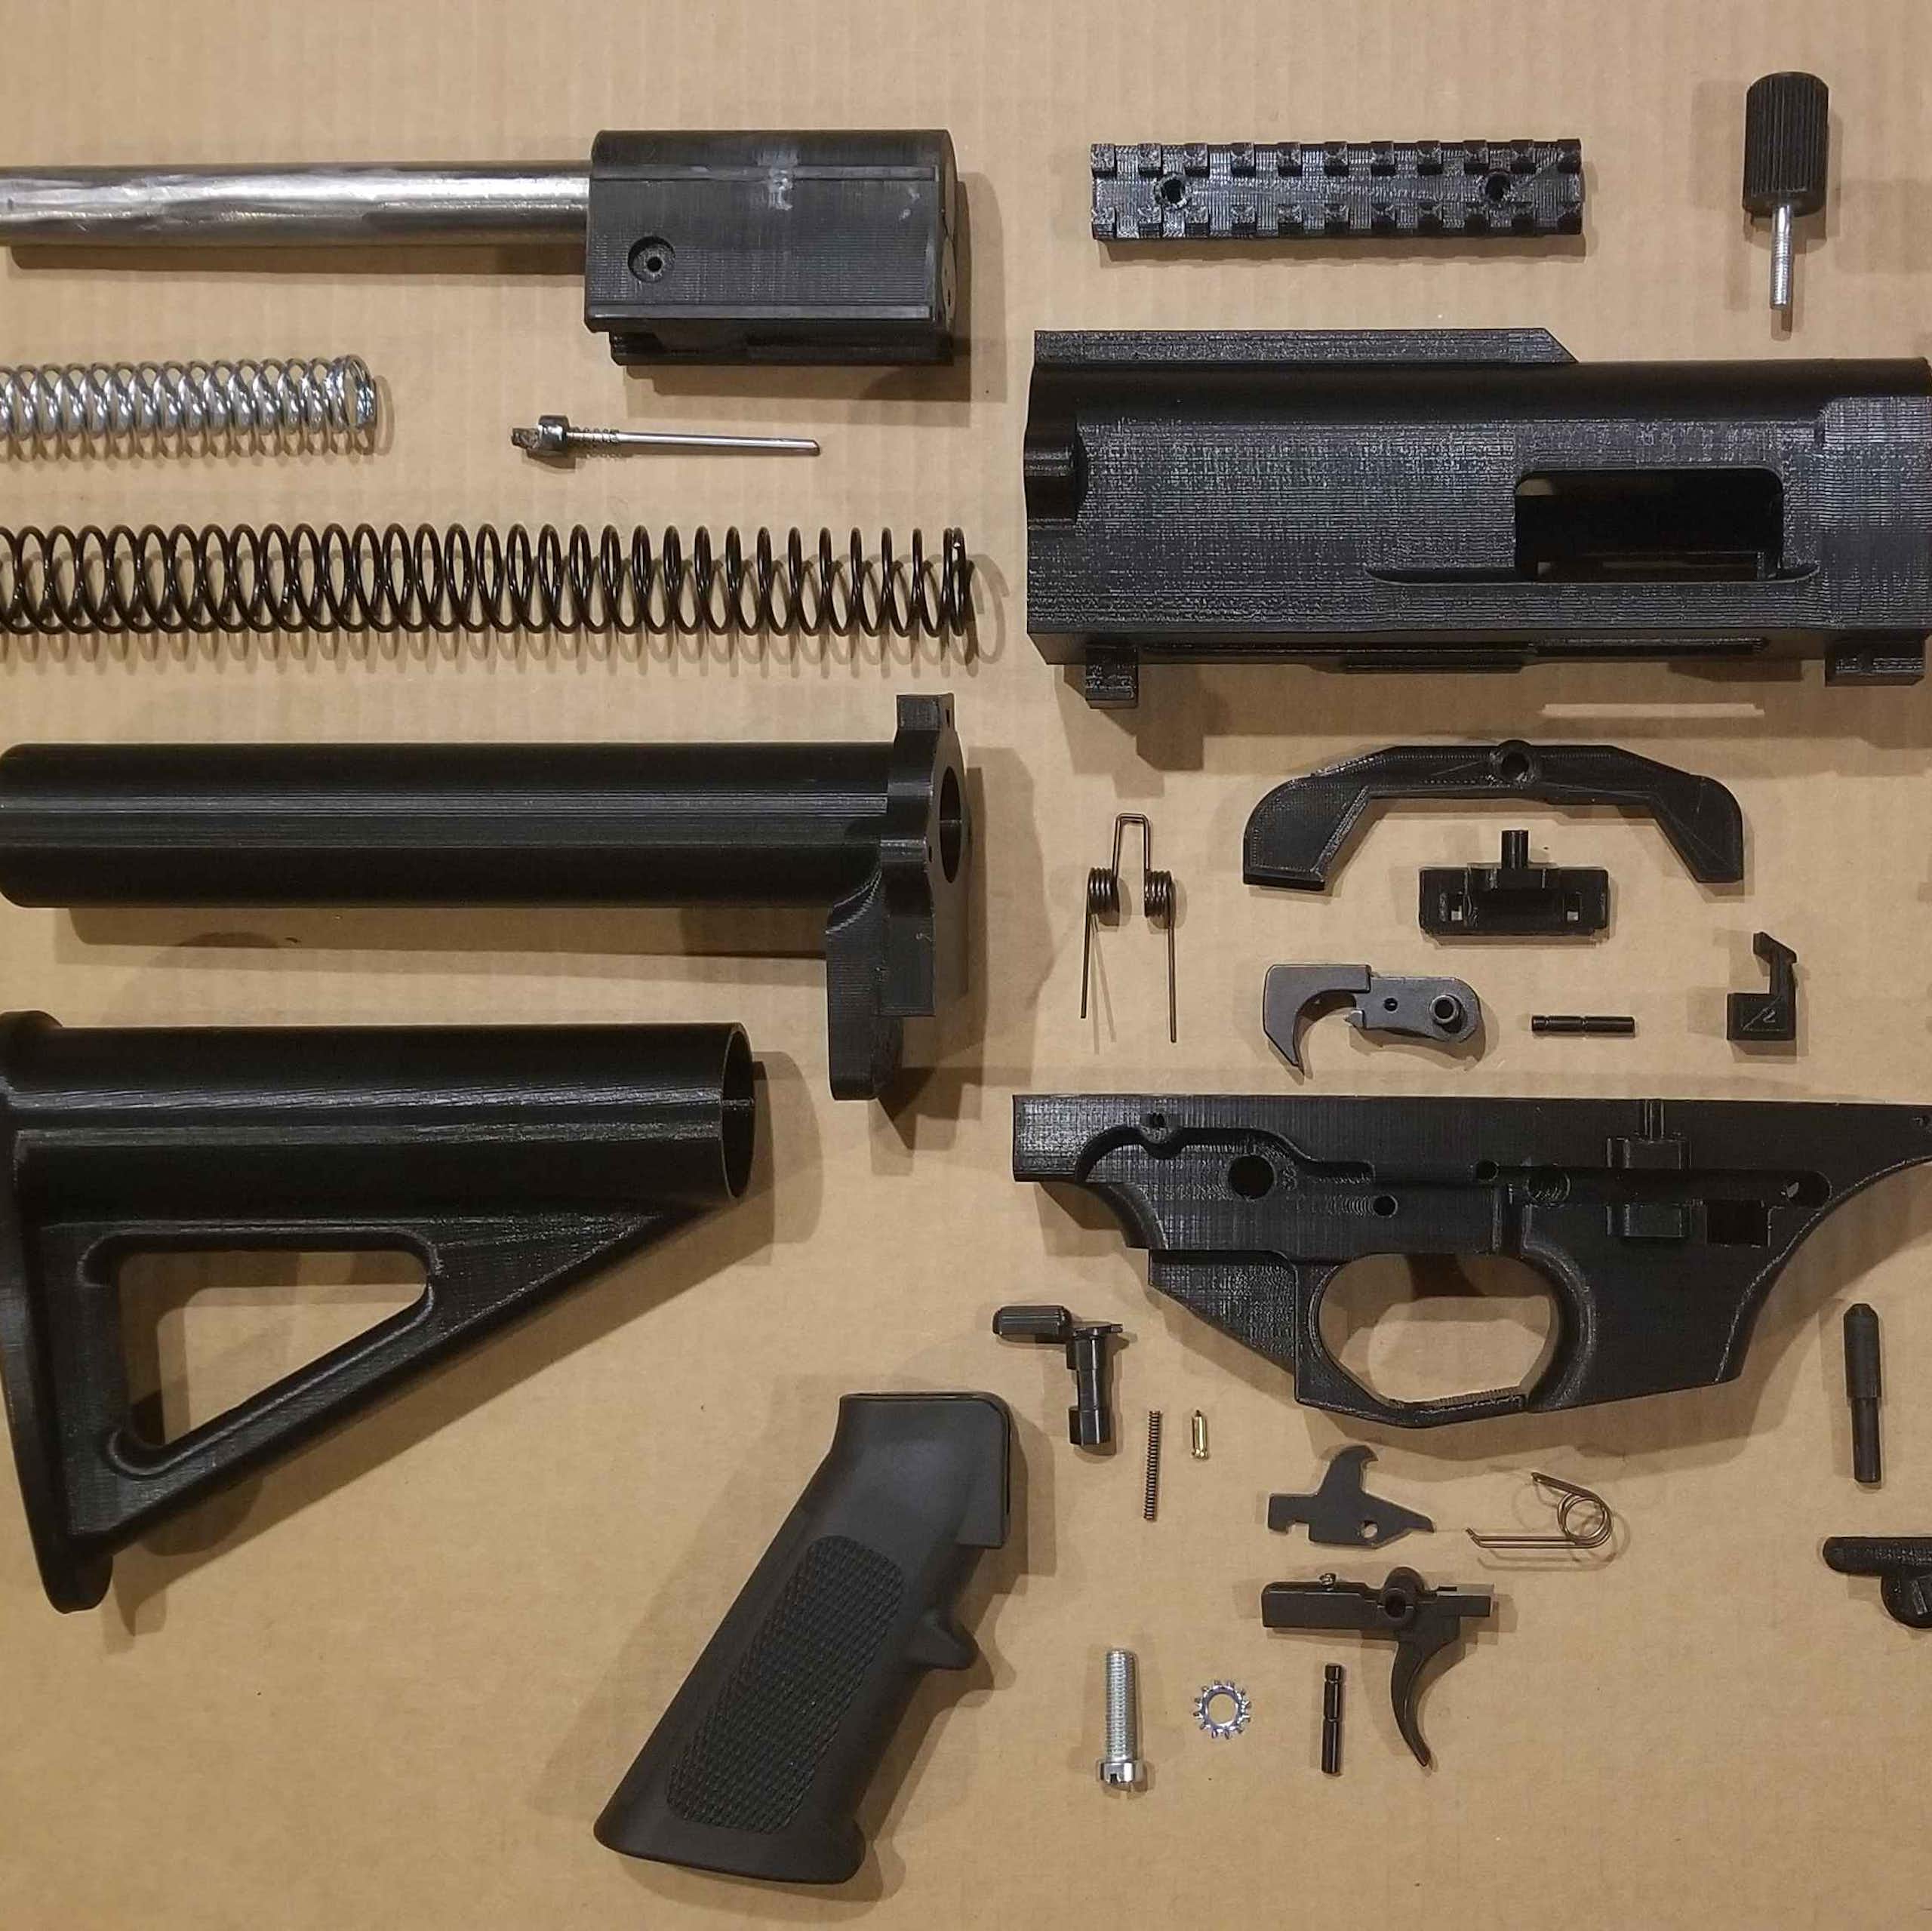 Disassembled components of the FGC-9 shadow gun.